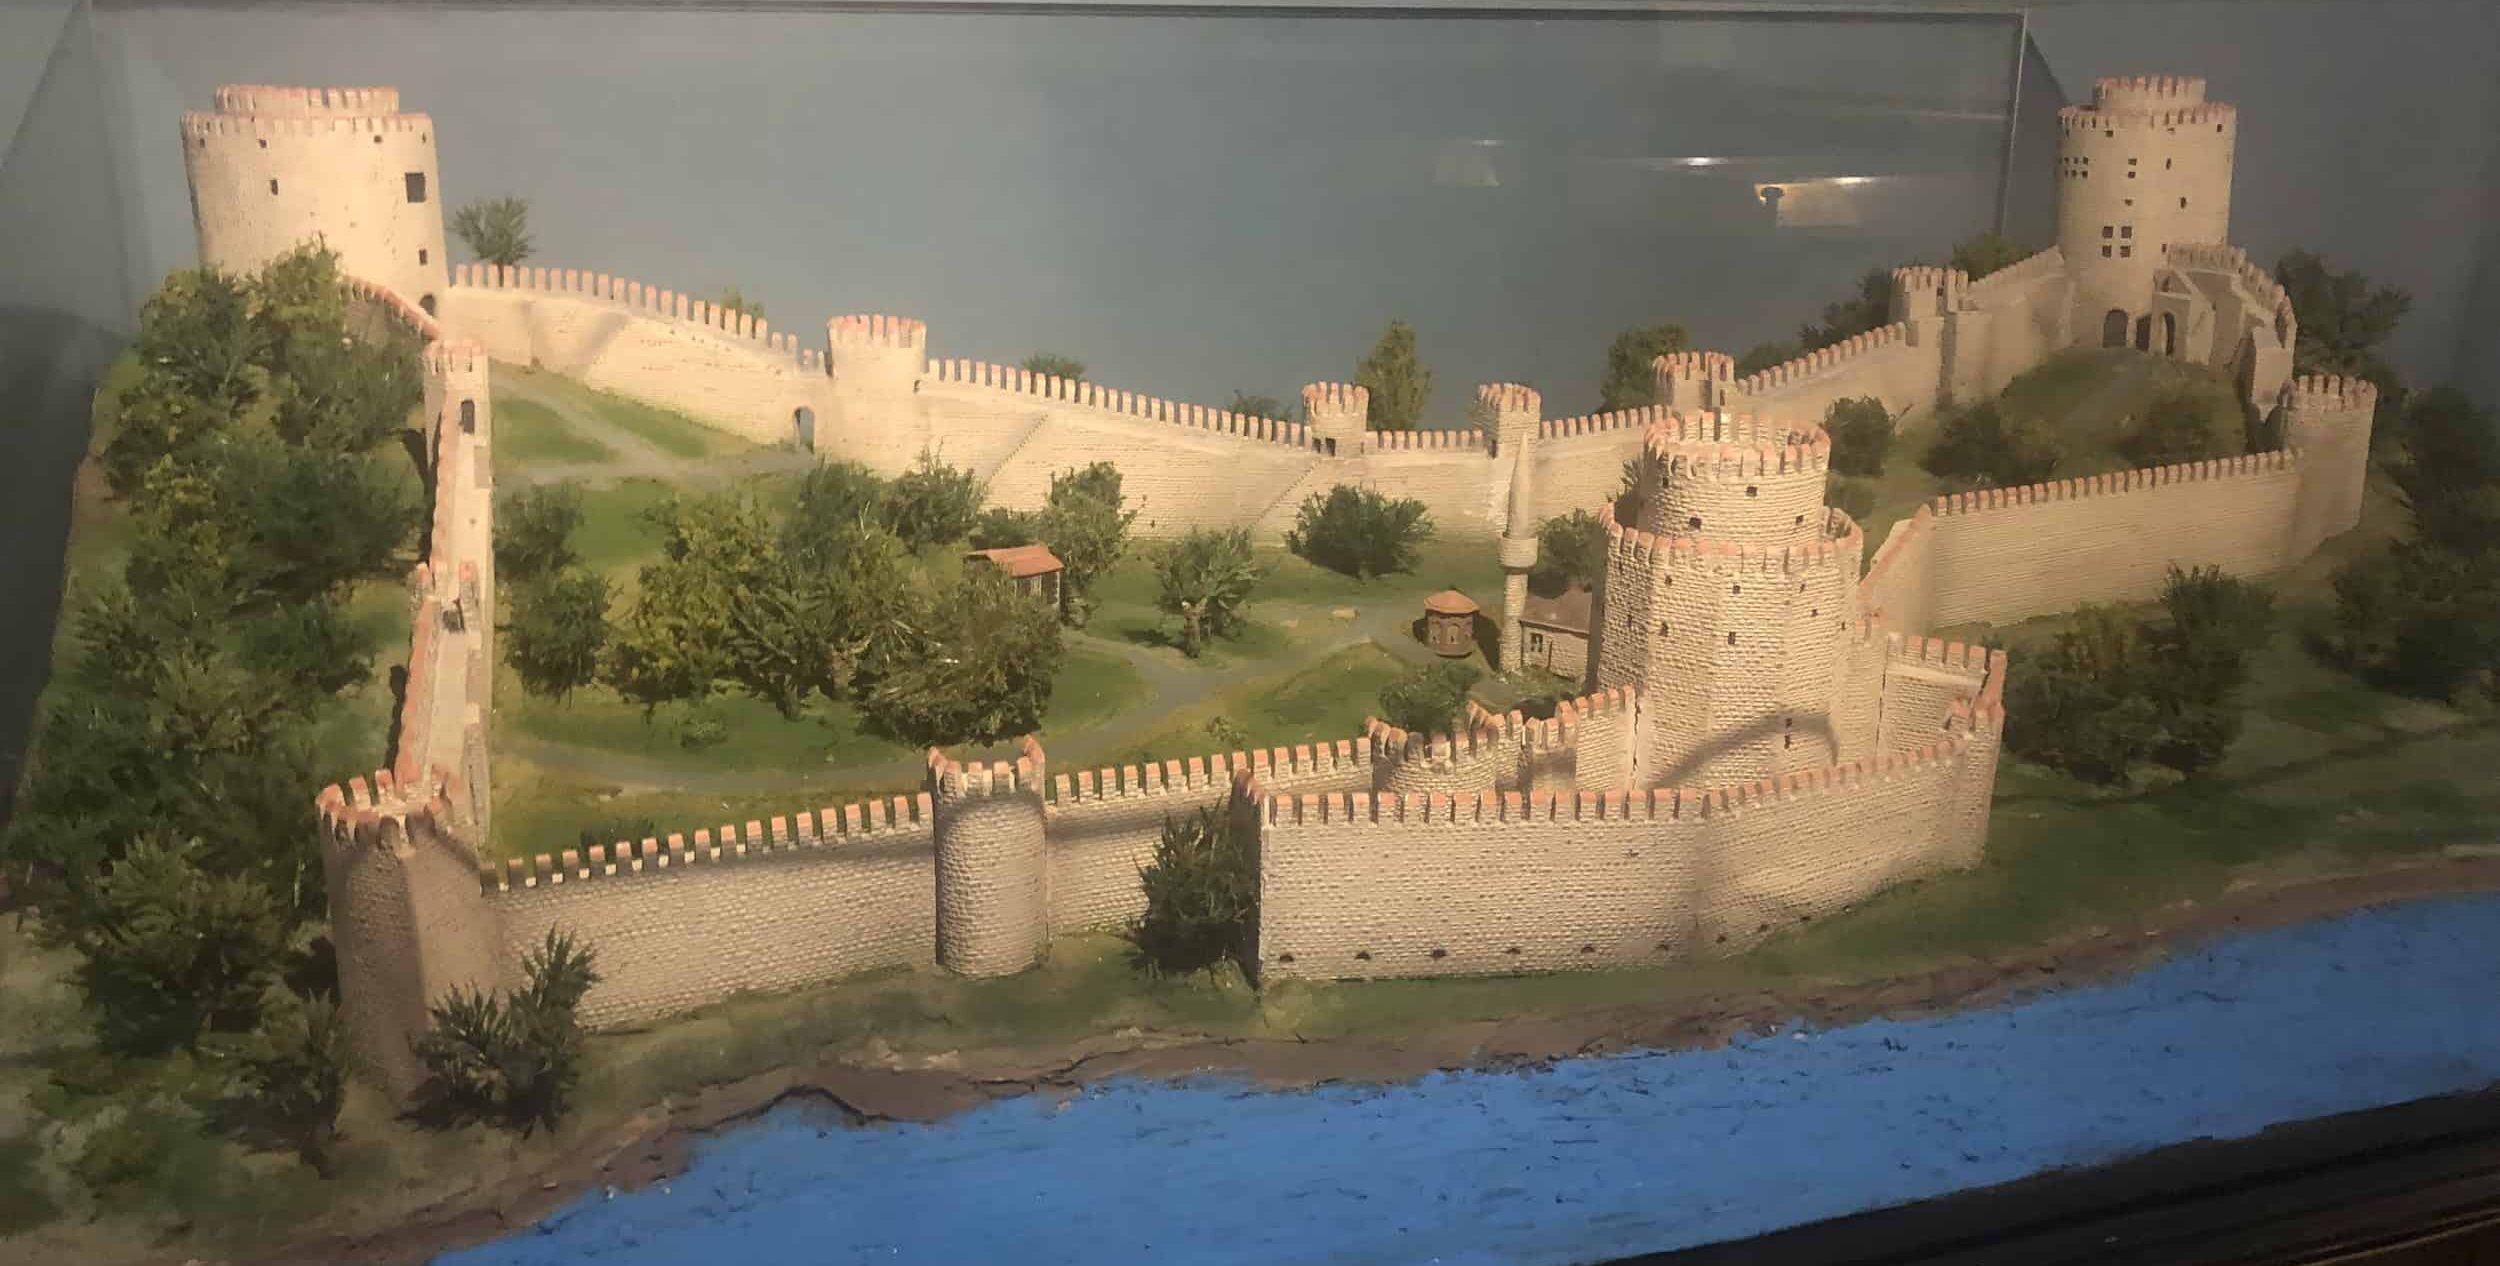 Model of Rumeli Fortress in the Conquest of Istanbul Hall